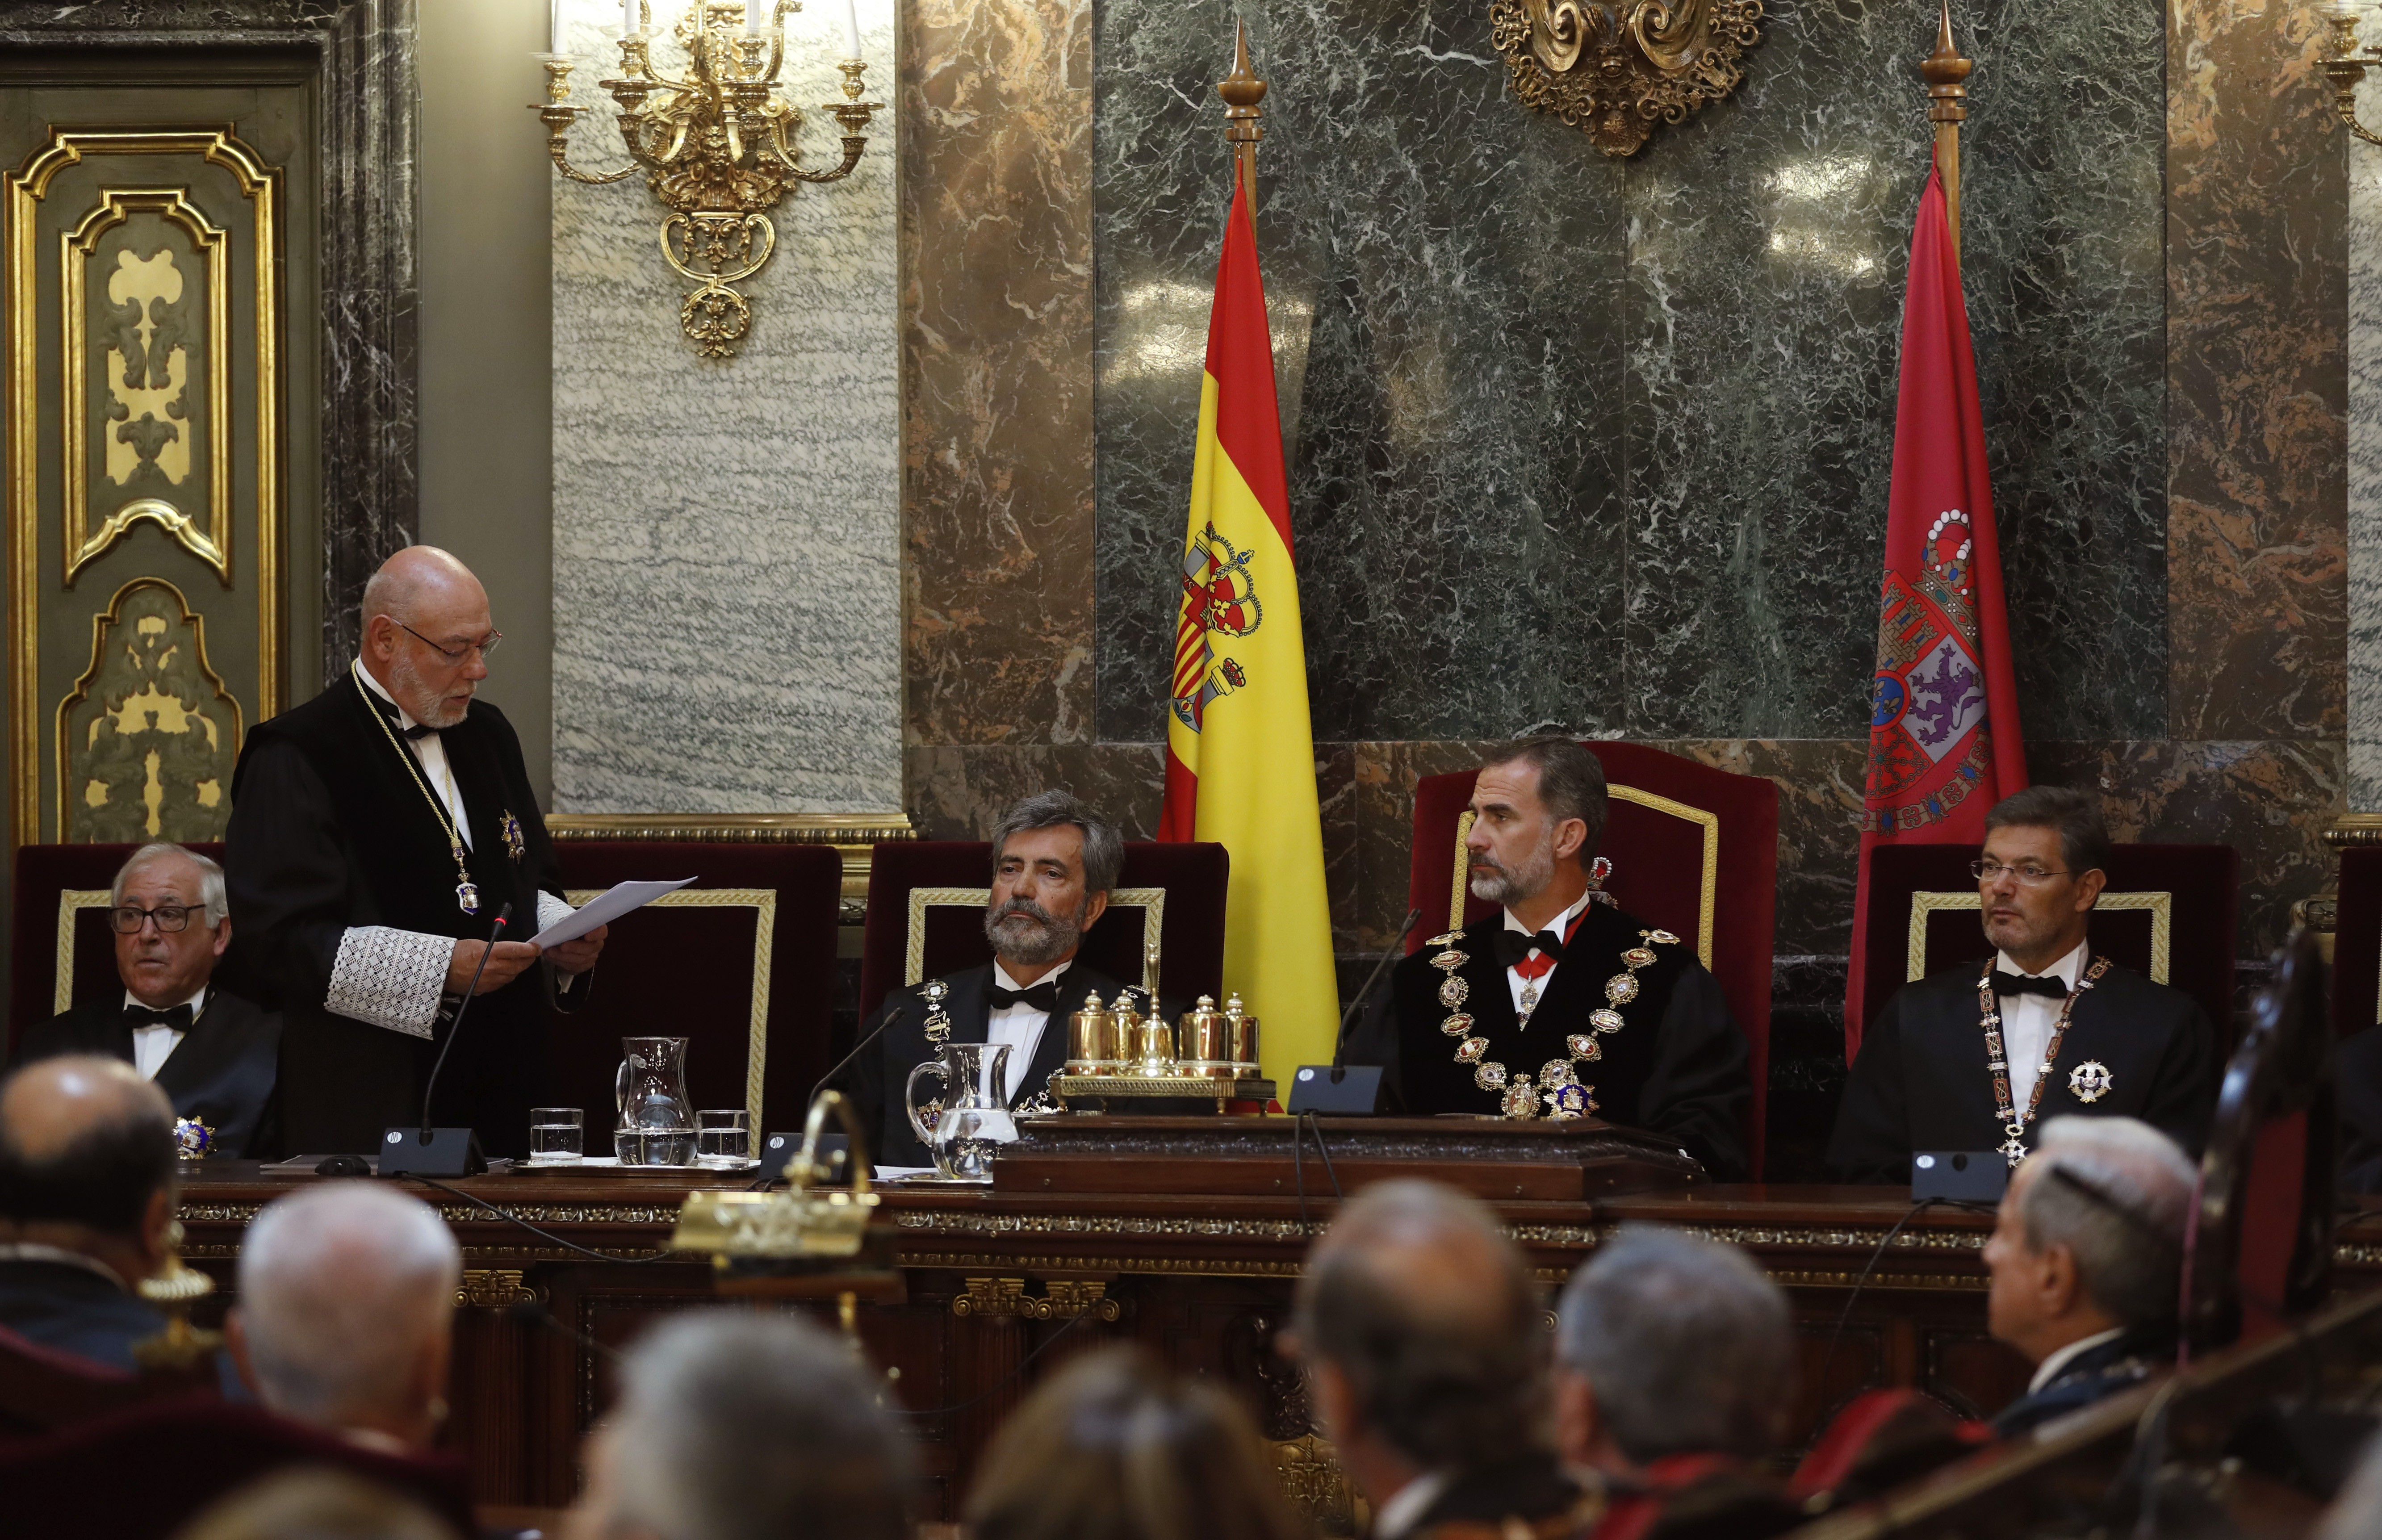 Spain's Public Prosecutor speaking alongside the Supreme Court president, the King of Spain and the minister of justice